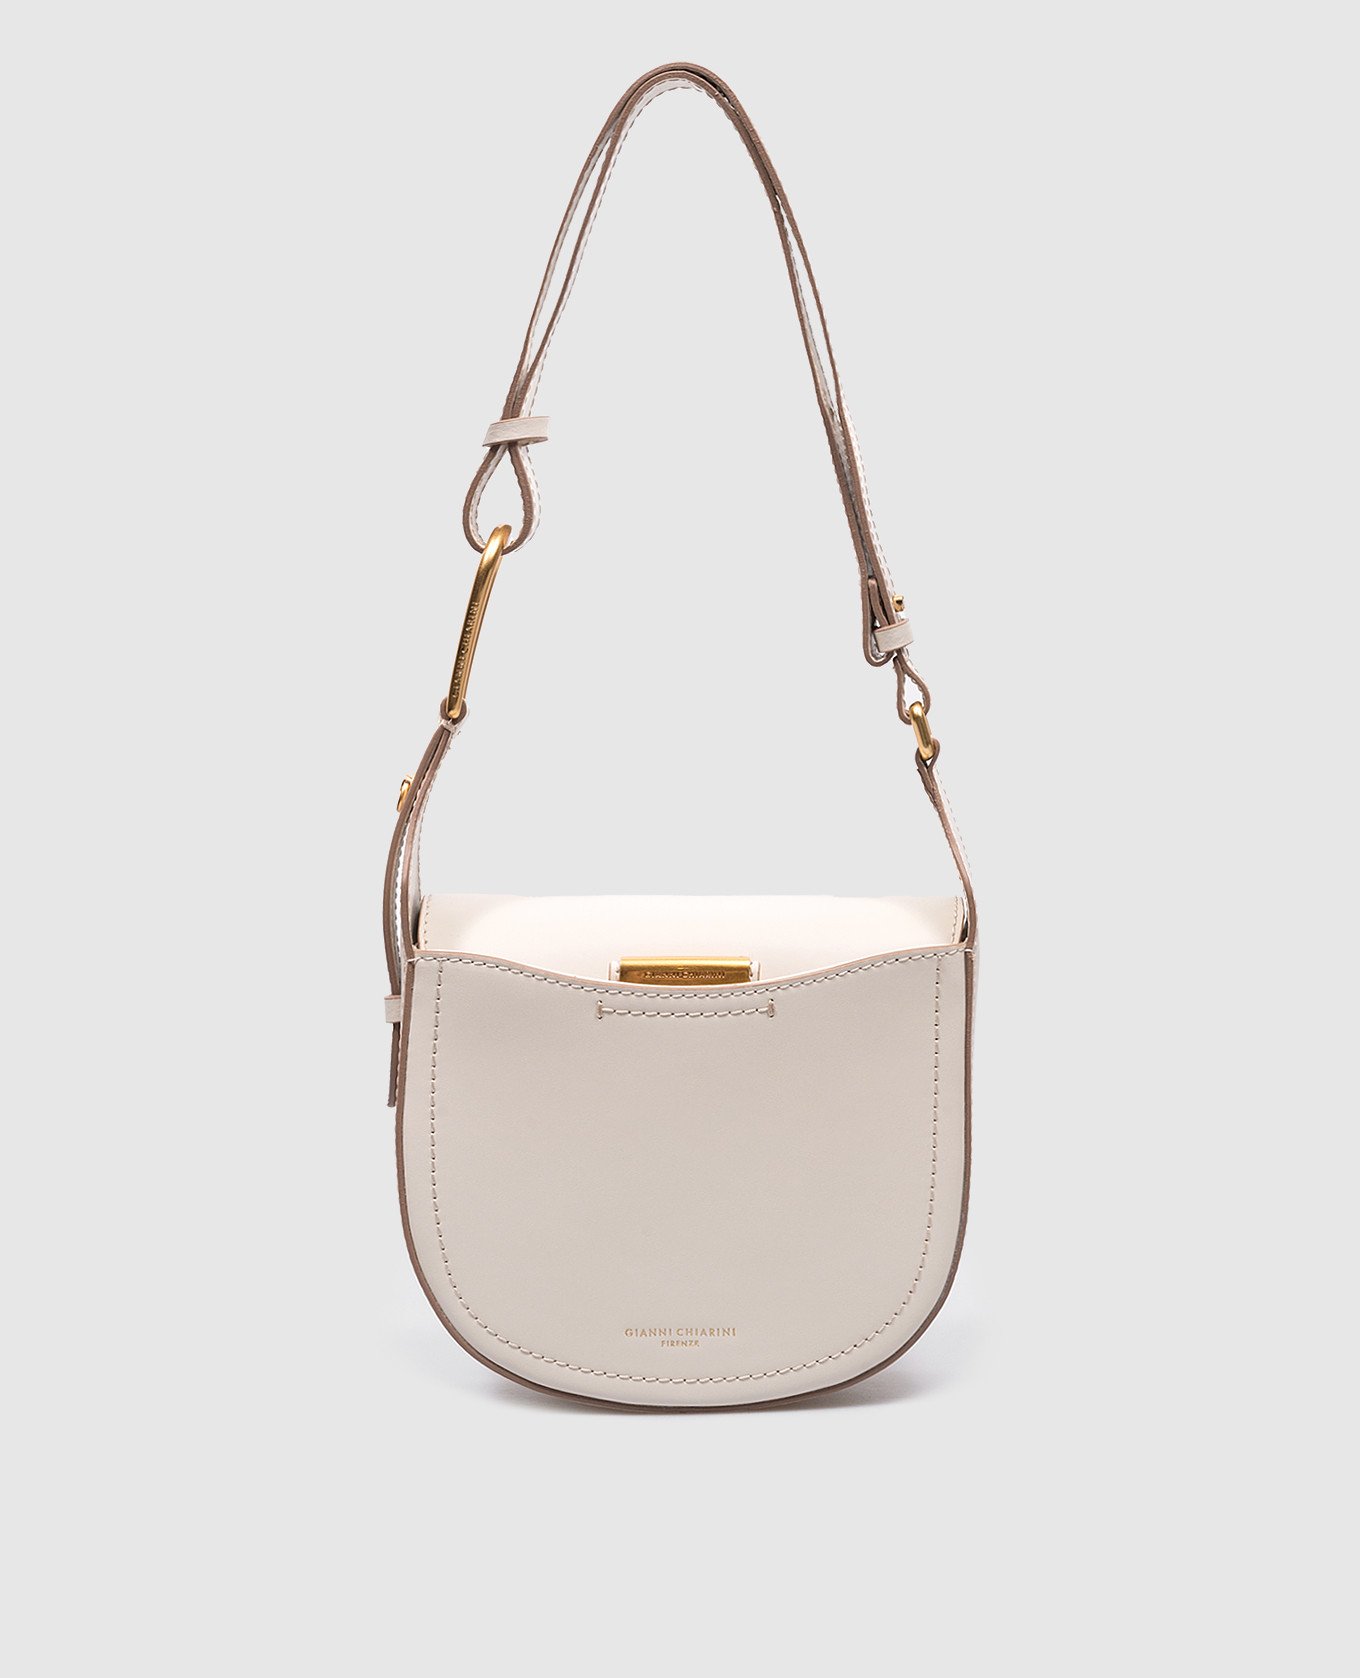 Sandy saddle bag in white leather with logo engraving